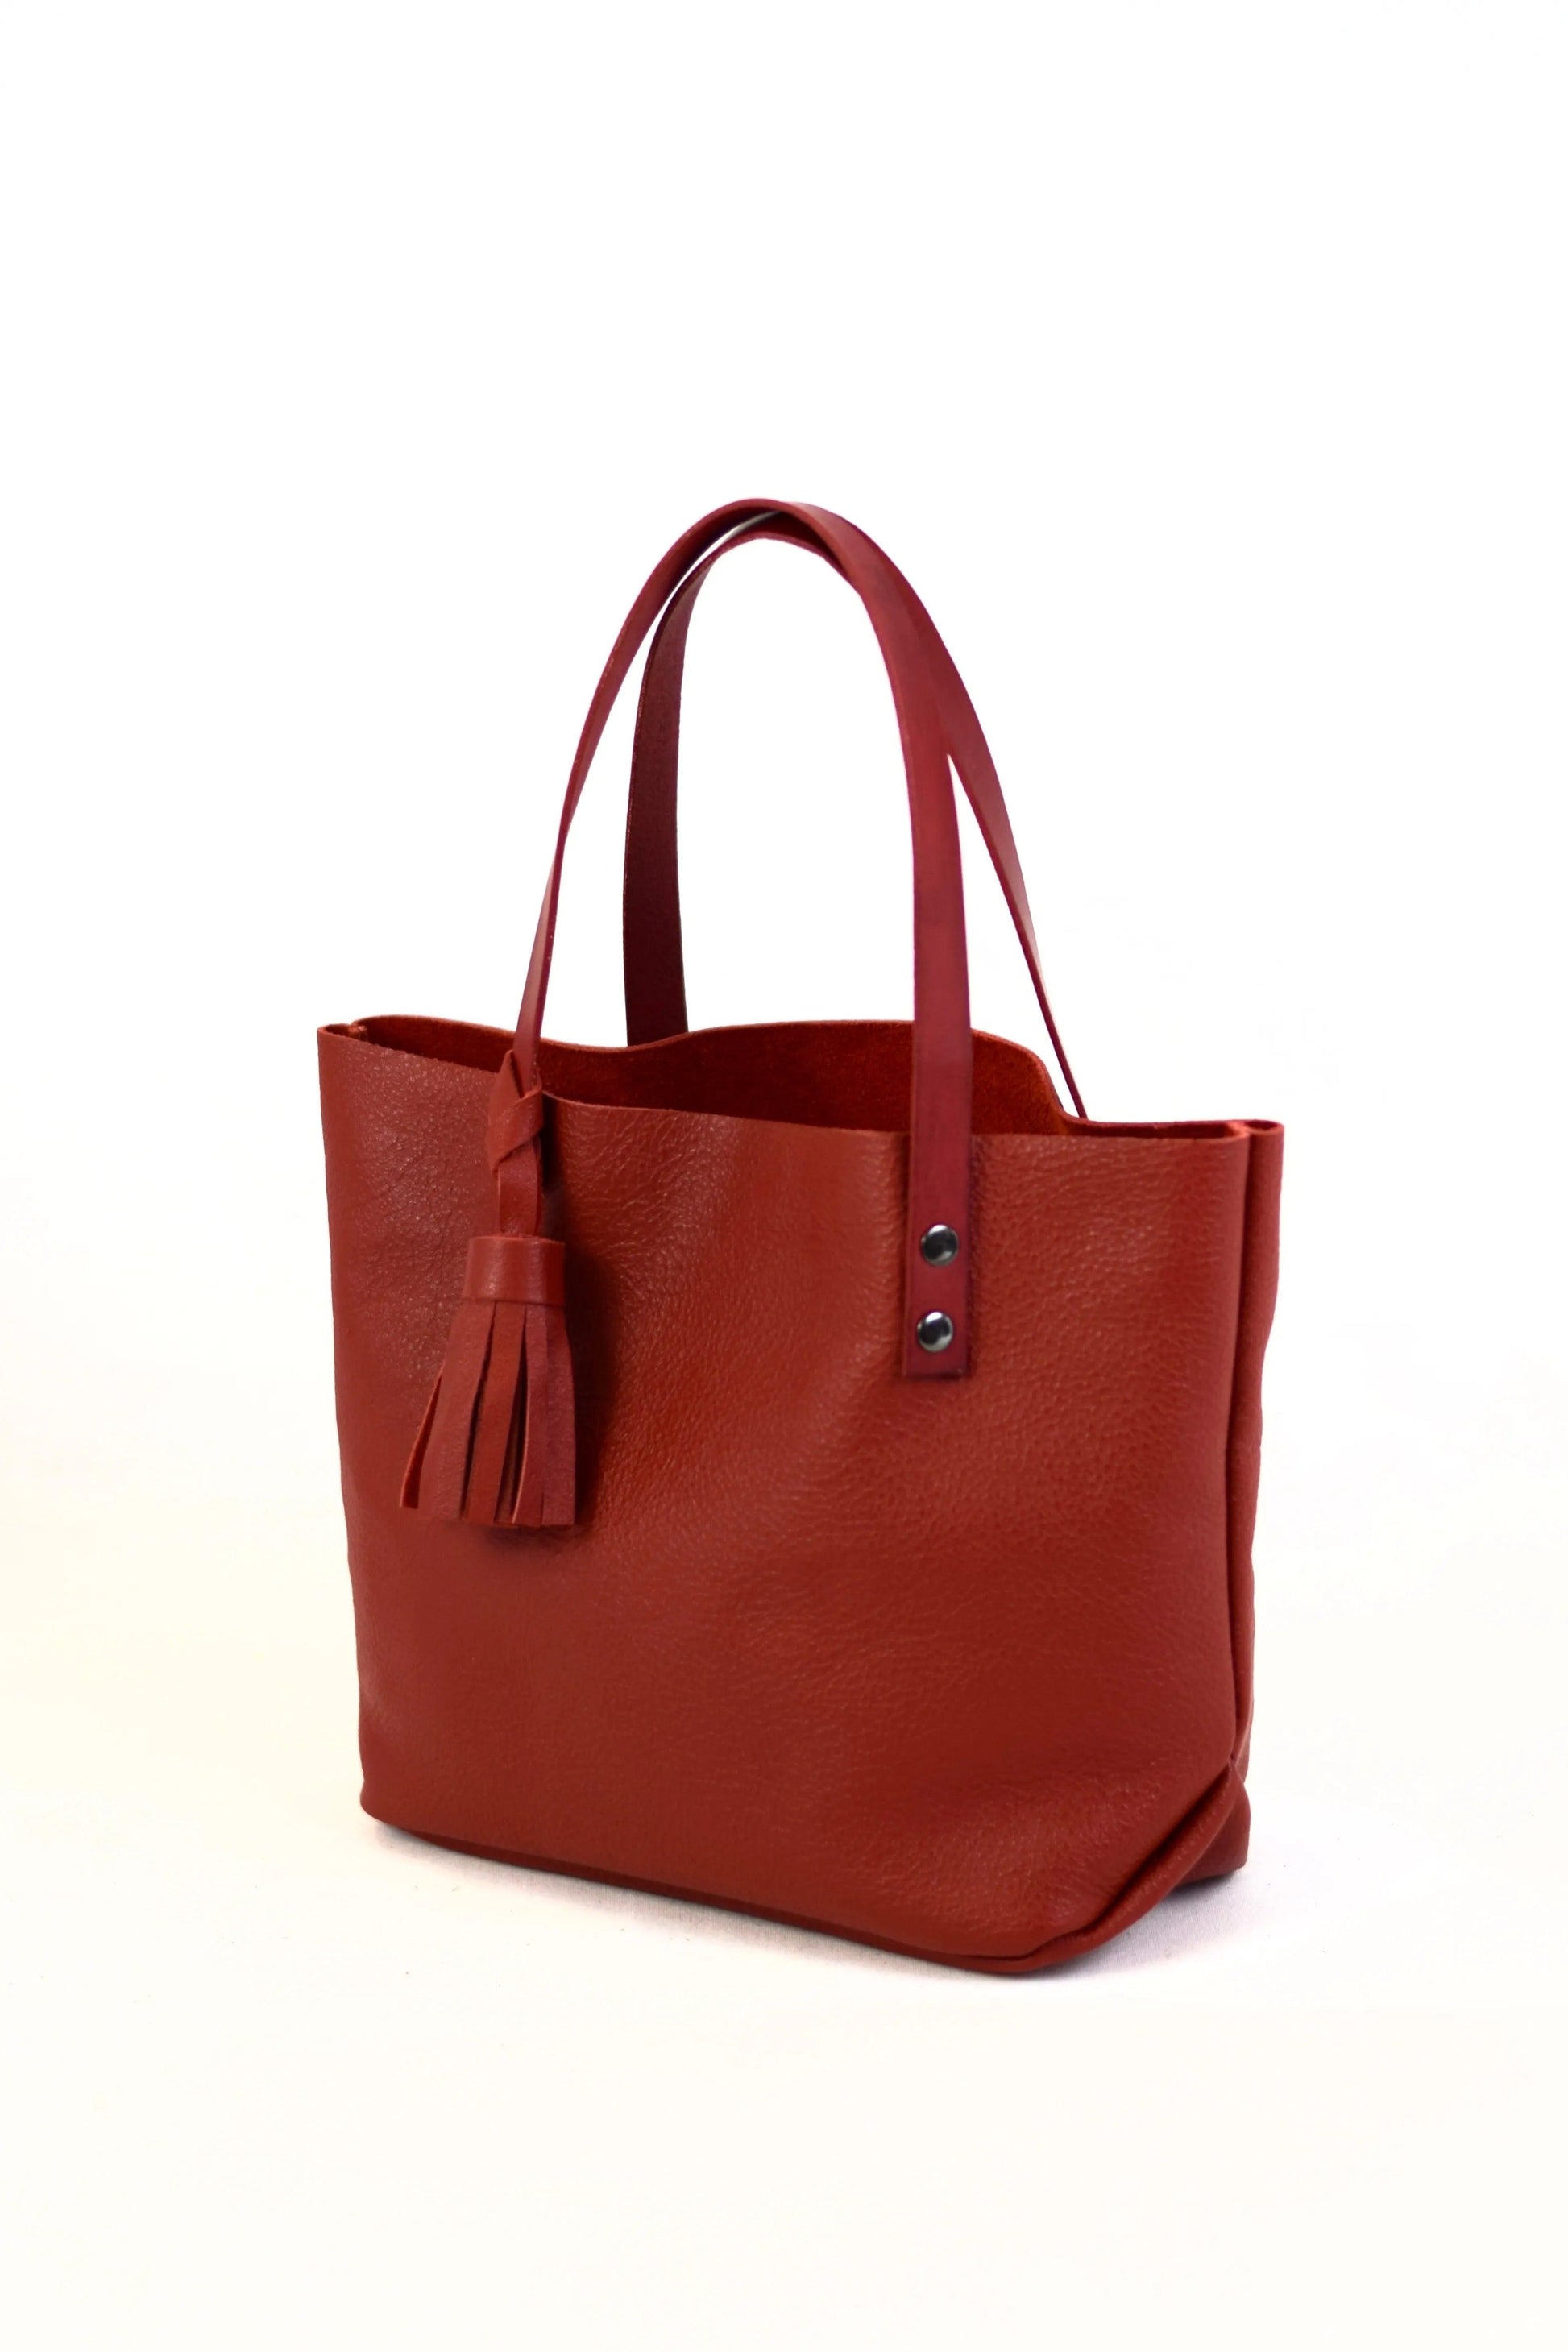 Red Chic Mini Tote Bag With Brown Leather Handles - Tasha Apparel Wholesale